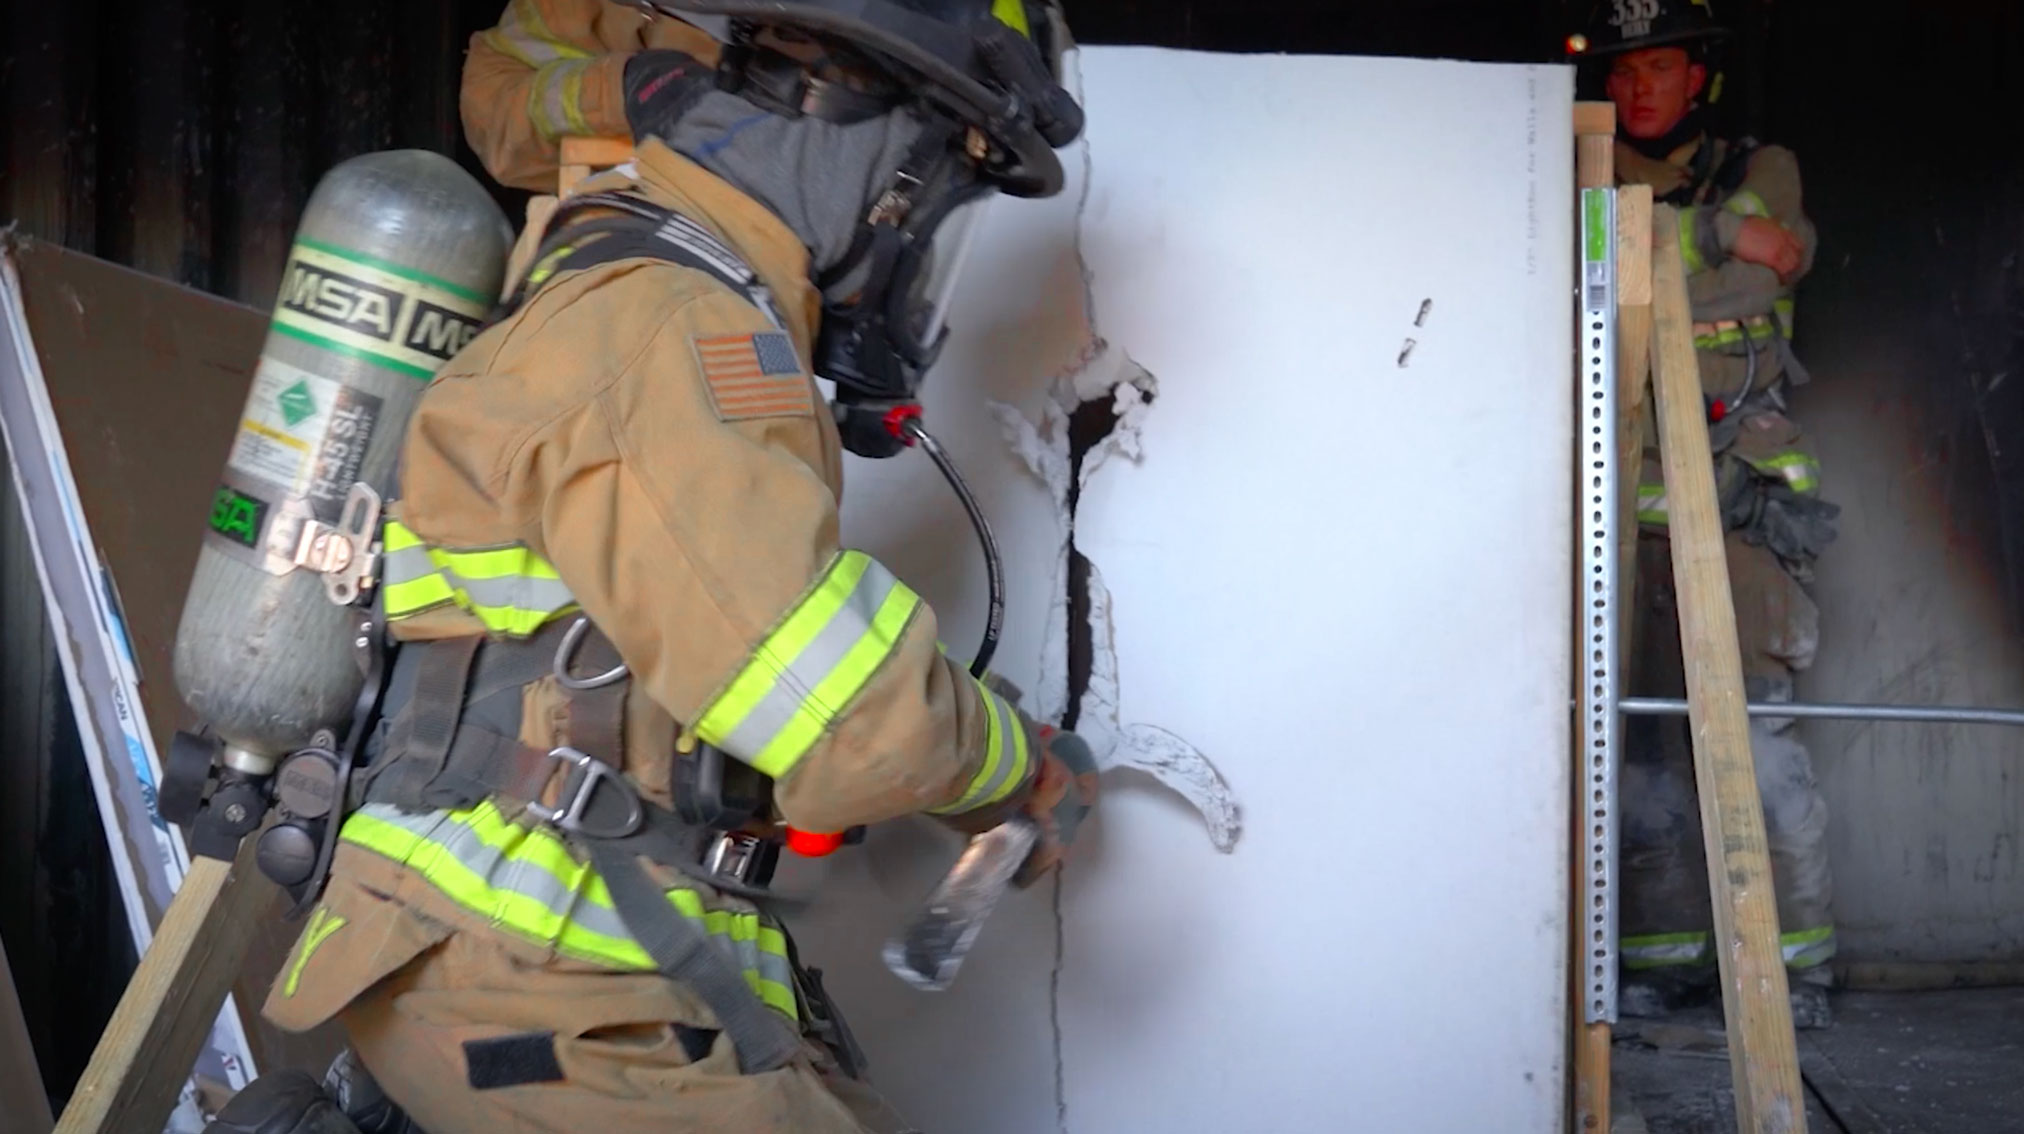 Featured image for “Firefighter Wall Breach | Structure Fire Training”